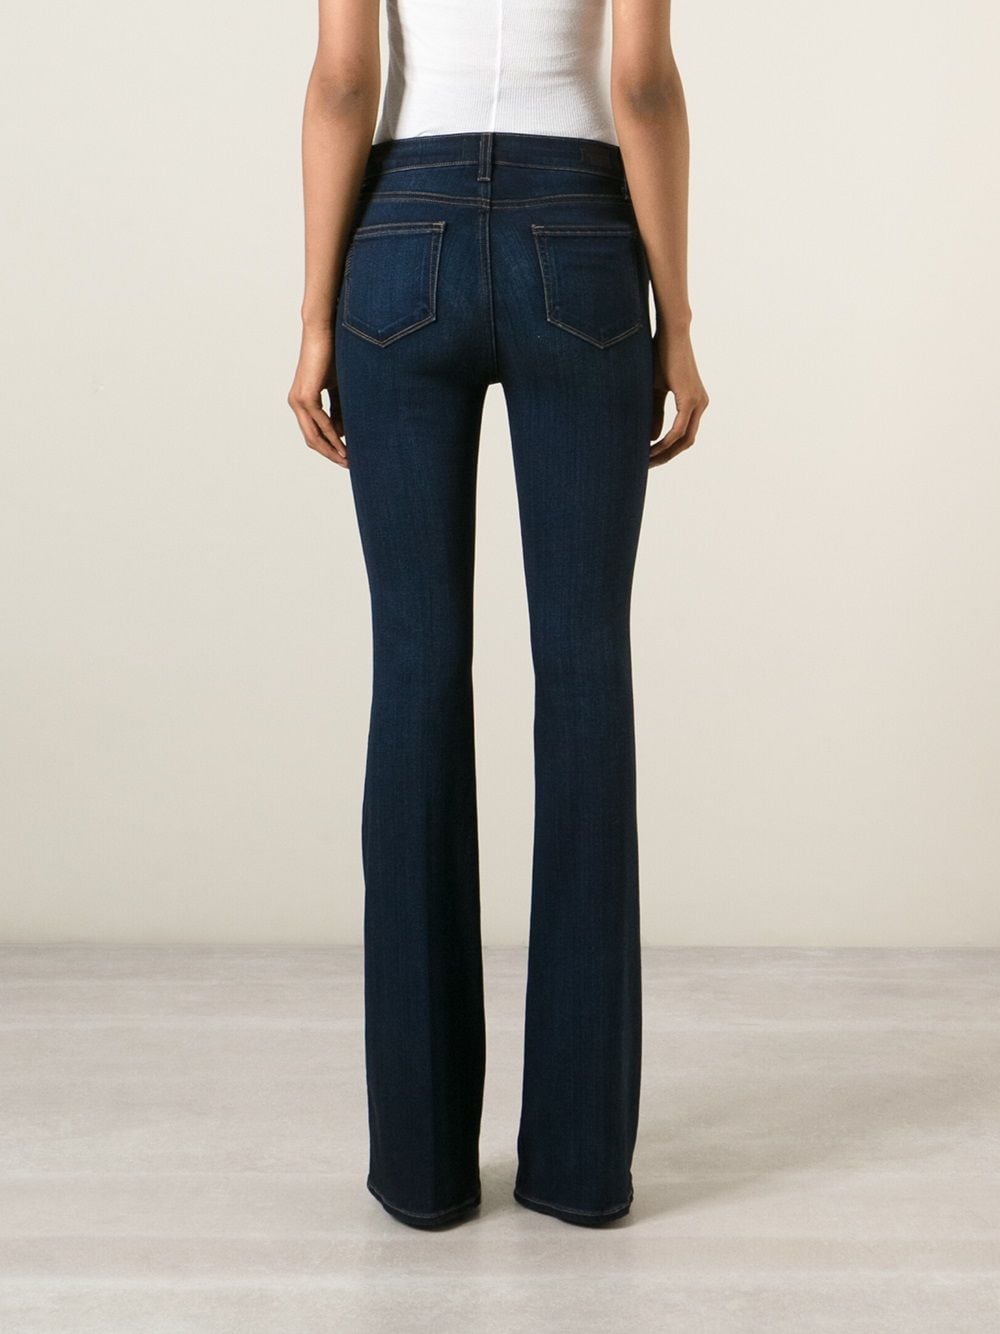 Paige 'High Rise Bell Canyon' Jeans - Farfetch